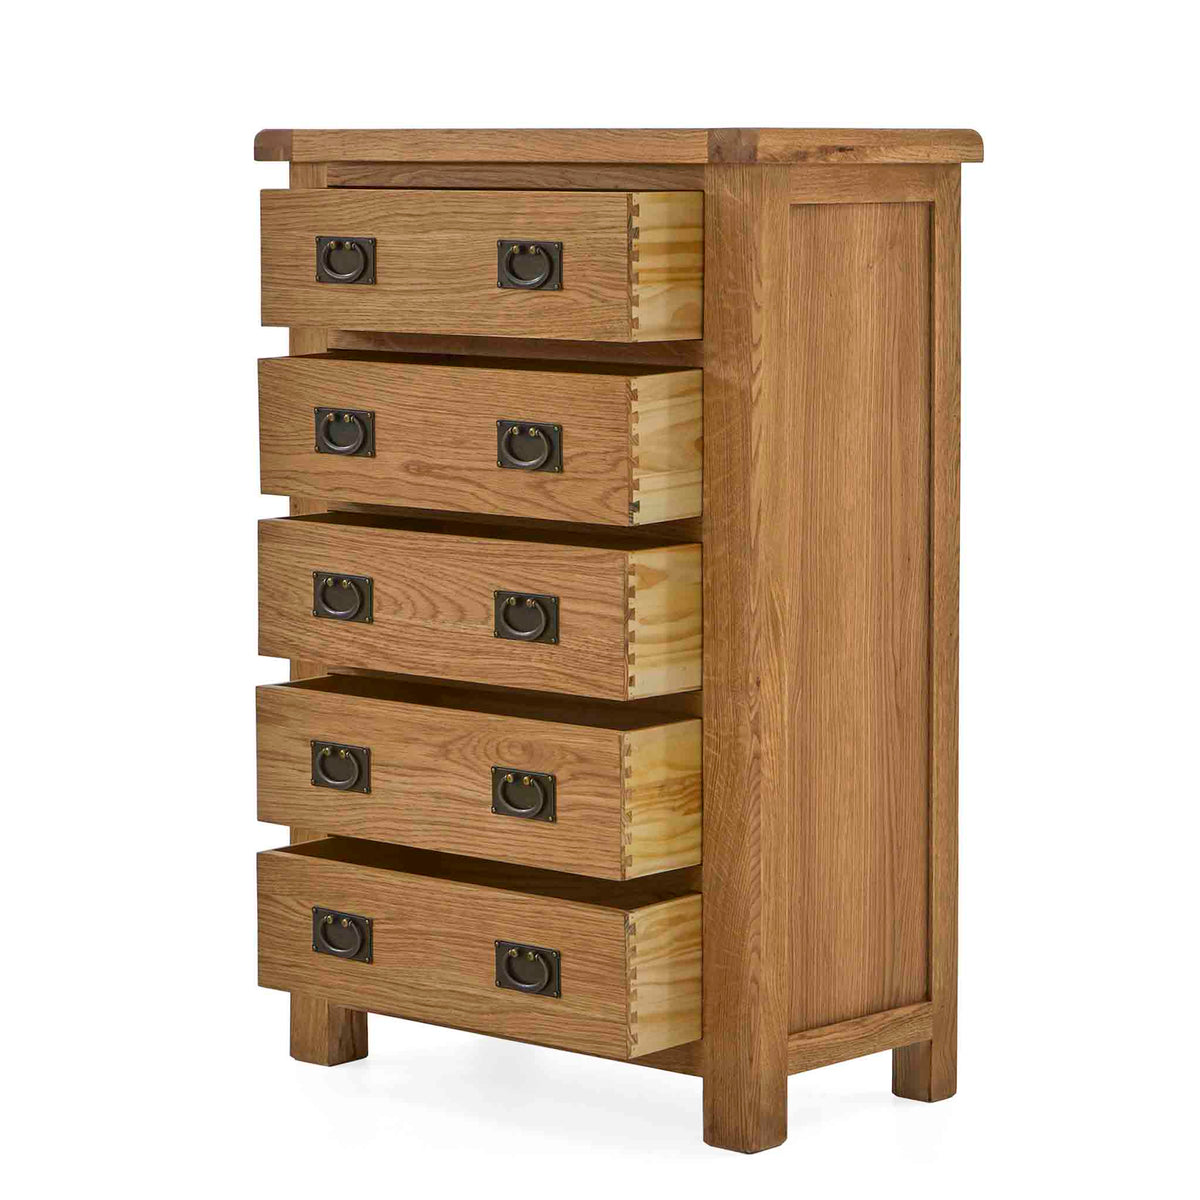 Zelah Oak 5 Drawer Chest of Drawers - Side view with drawers open